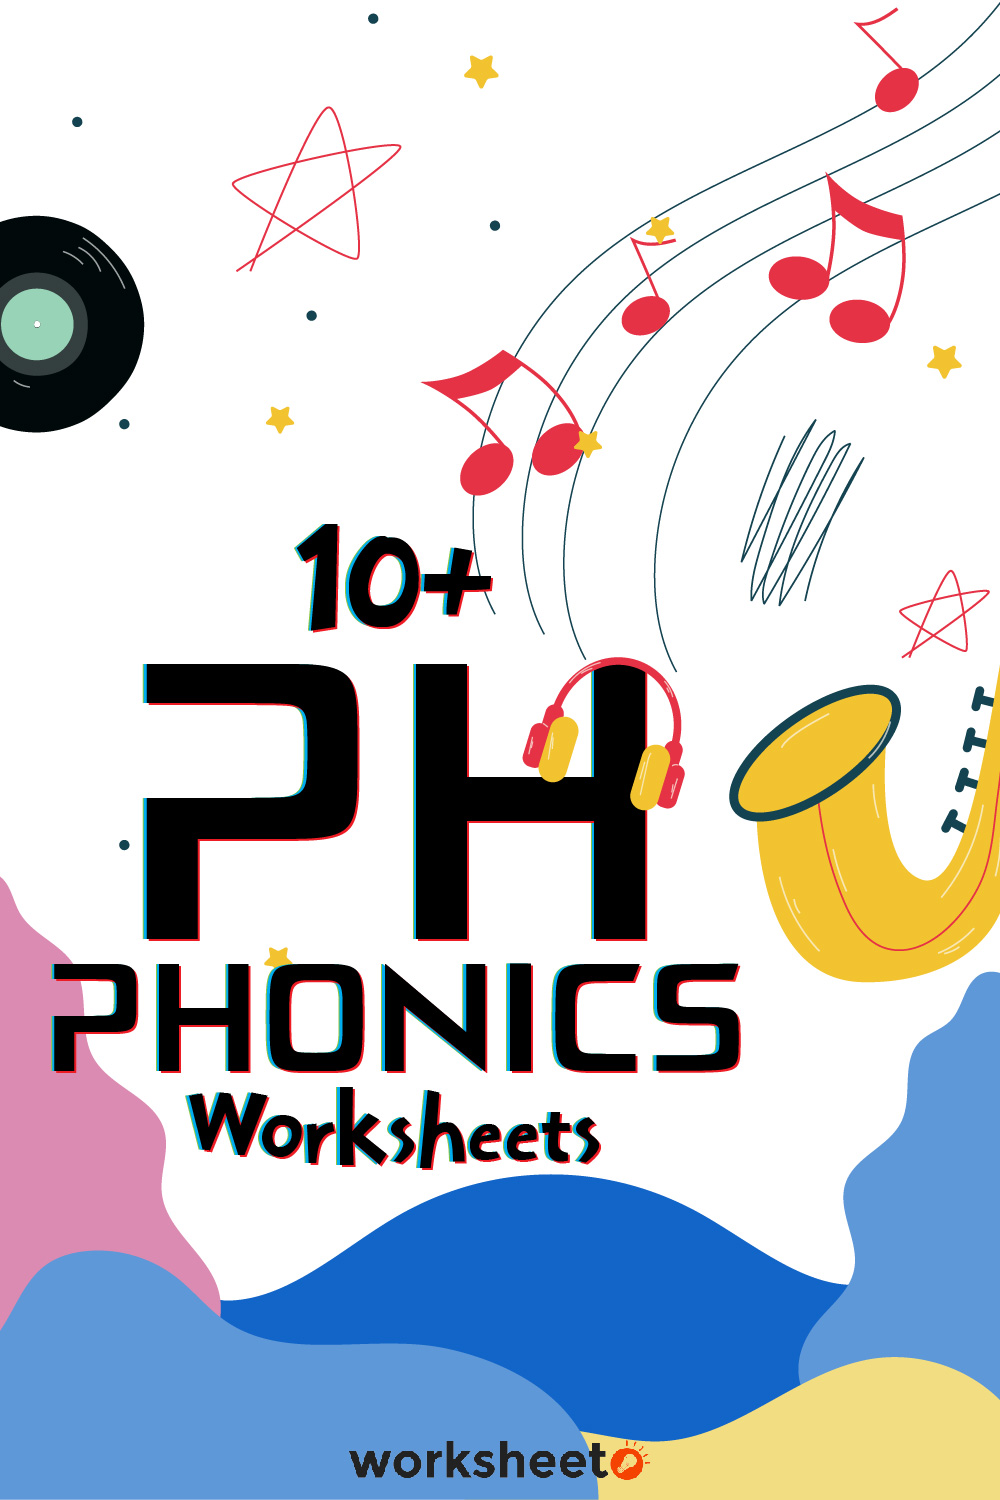 14 Images of Ph Phonics Worksheets